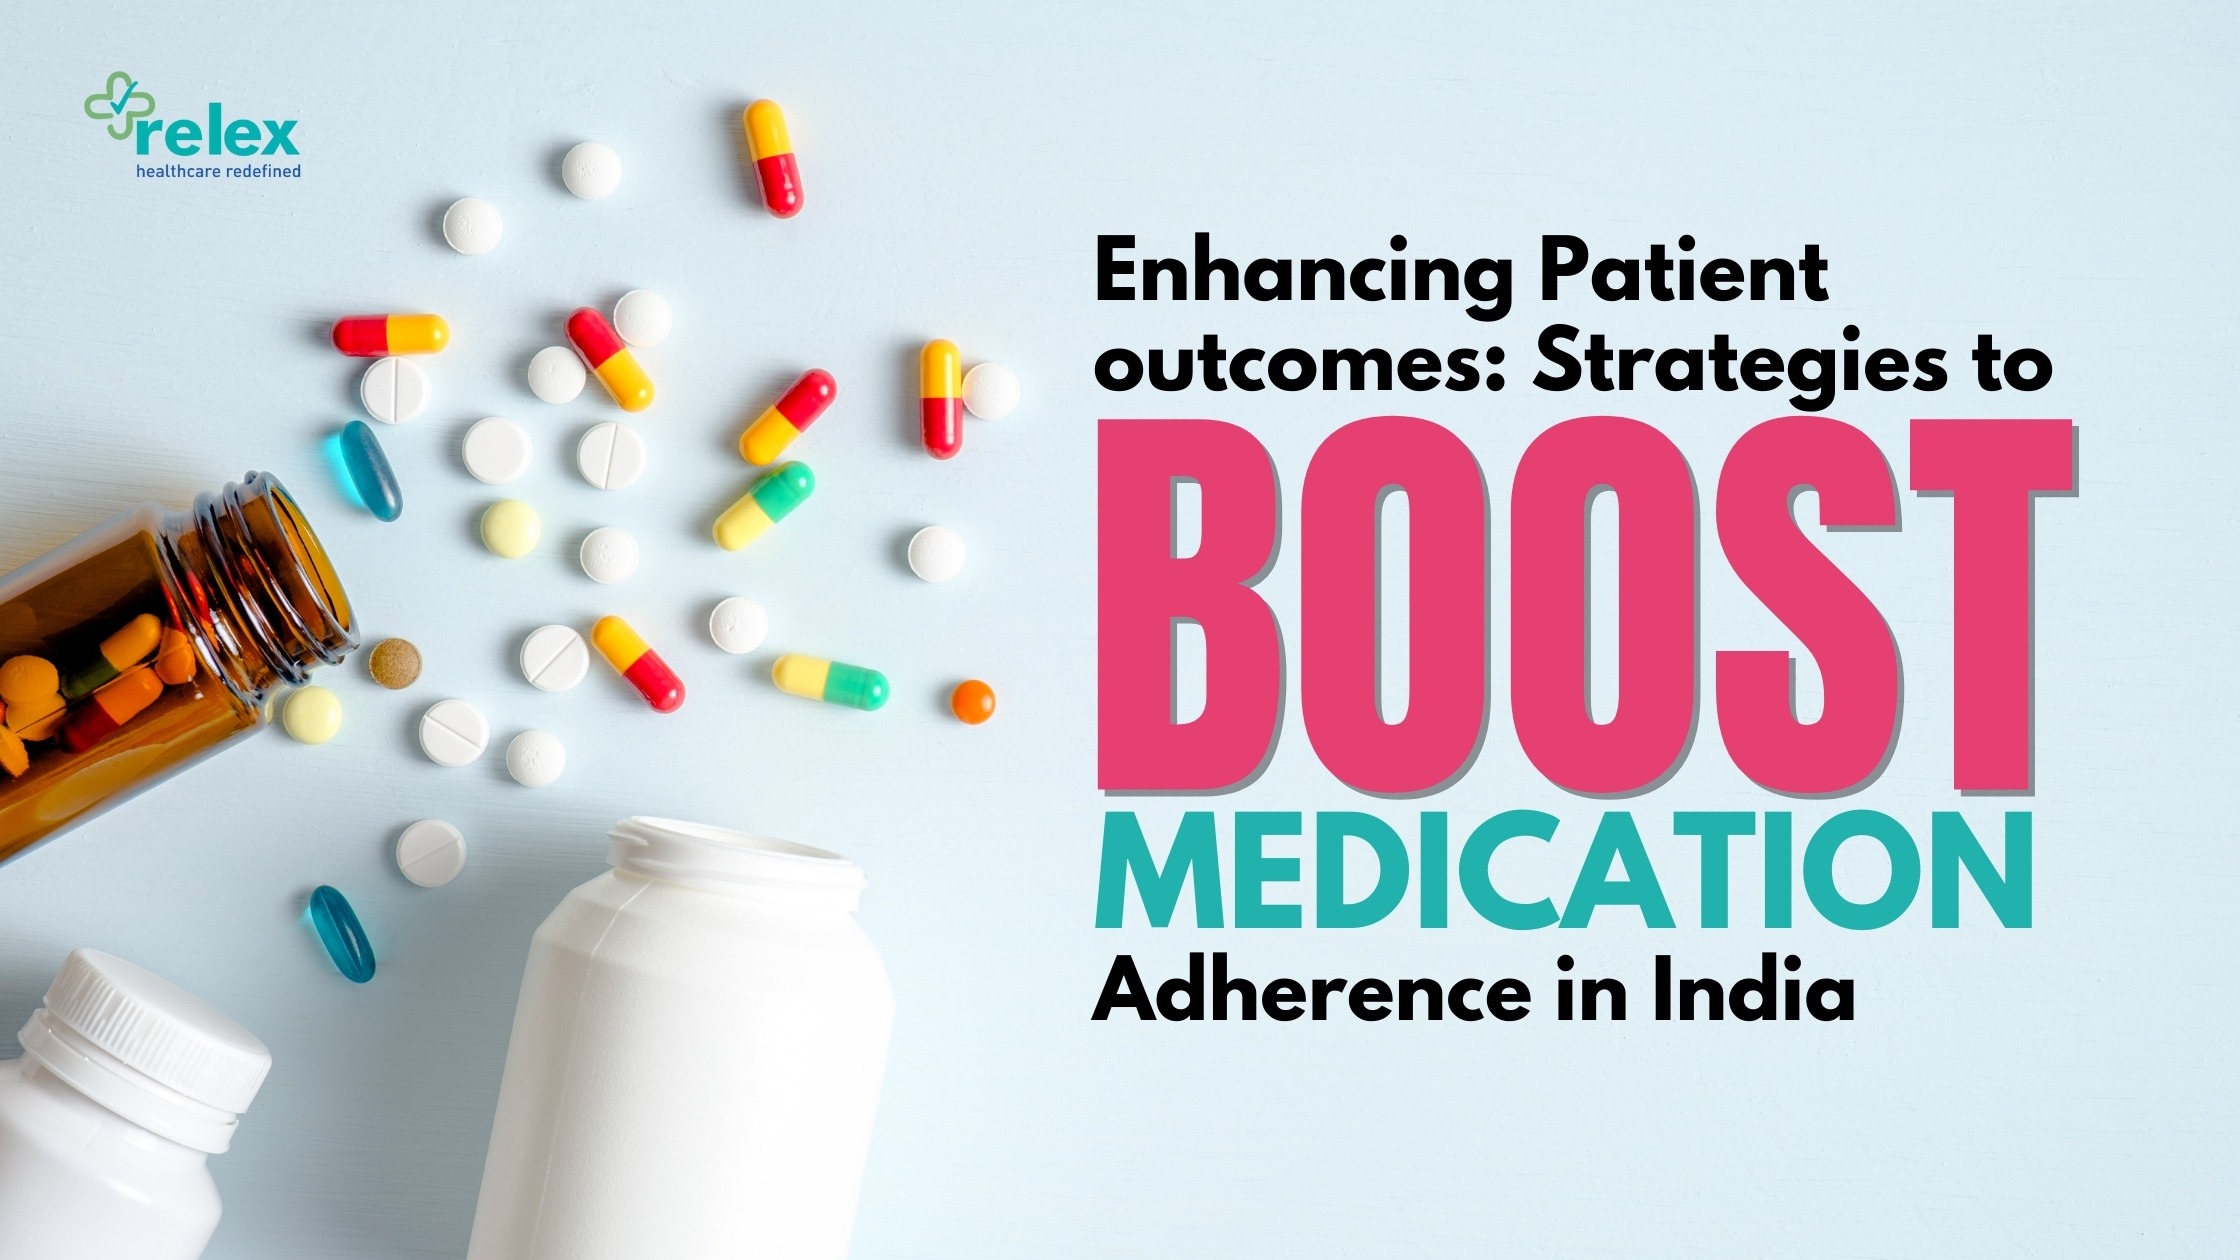 Enhancing Patient Outcomes: Strategies to Boost Medication Adherence in India